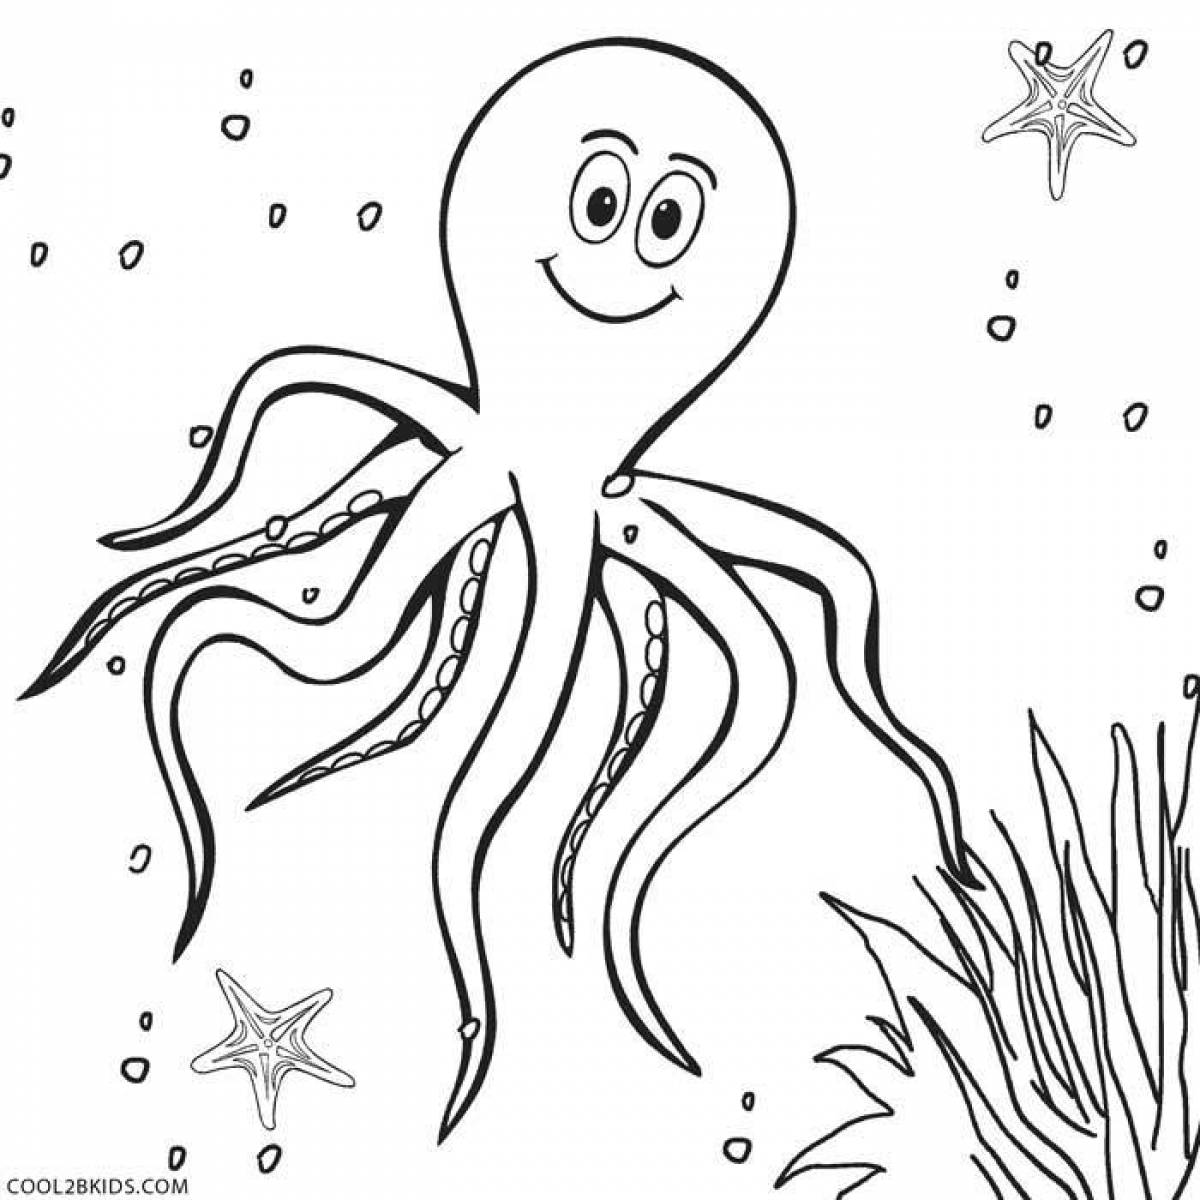 Outstanding octopus coloring book for kids